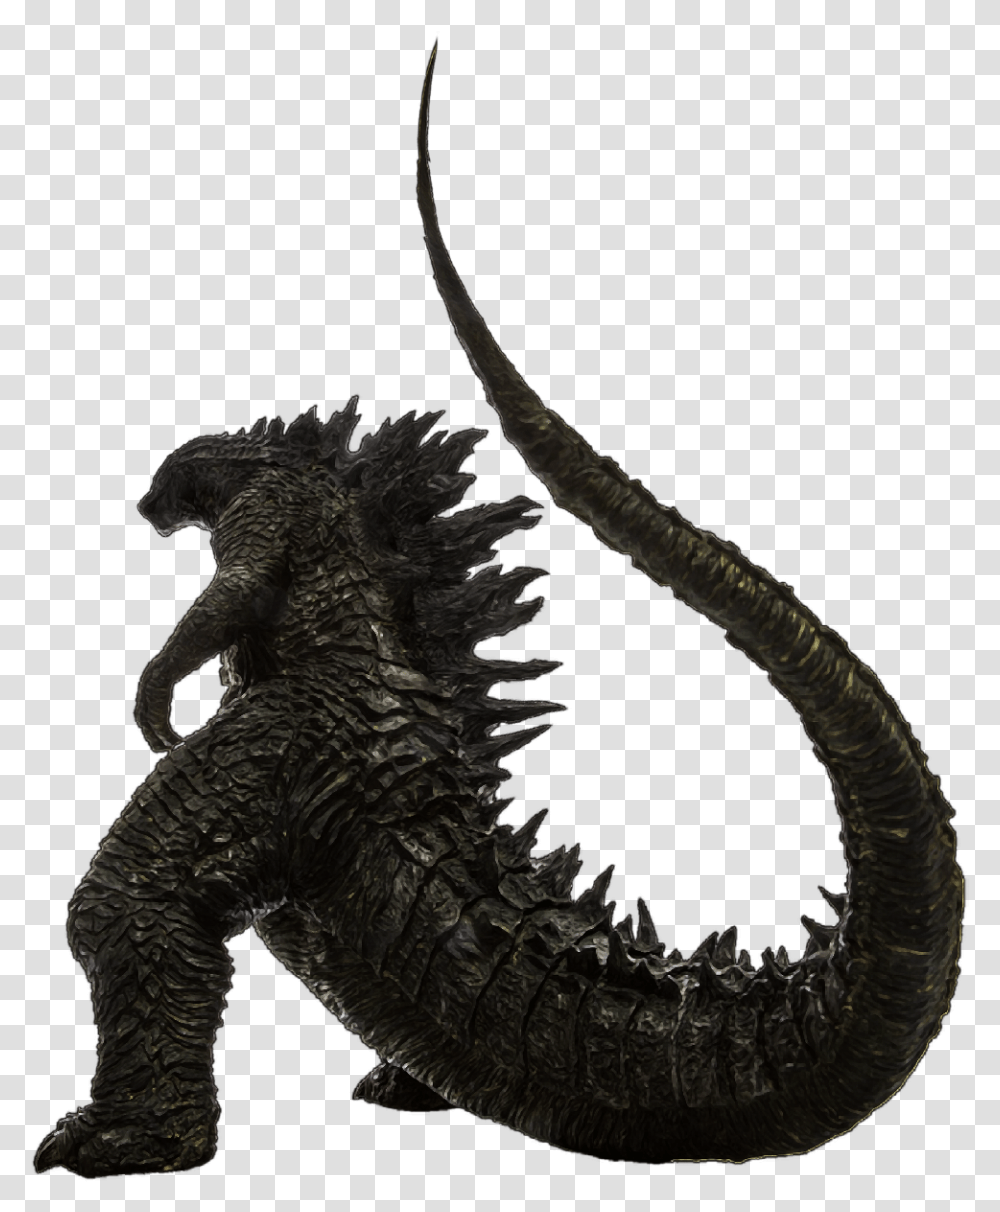 Free Render For Use Legendary Godzilla, Dragon, Snake, Reptile, Animal Transparent Png